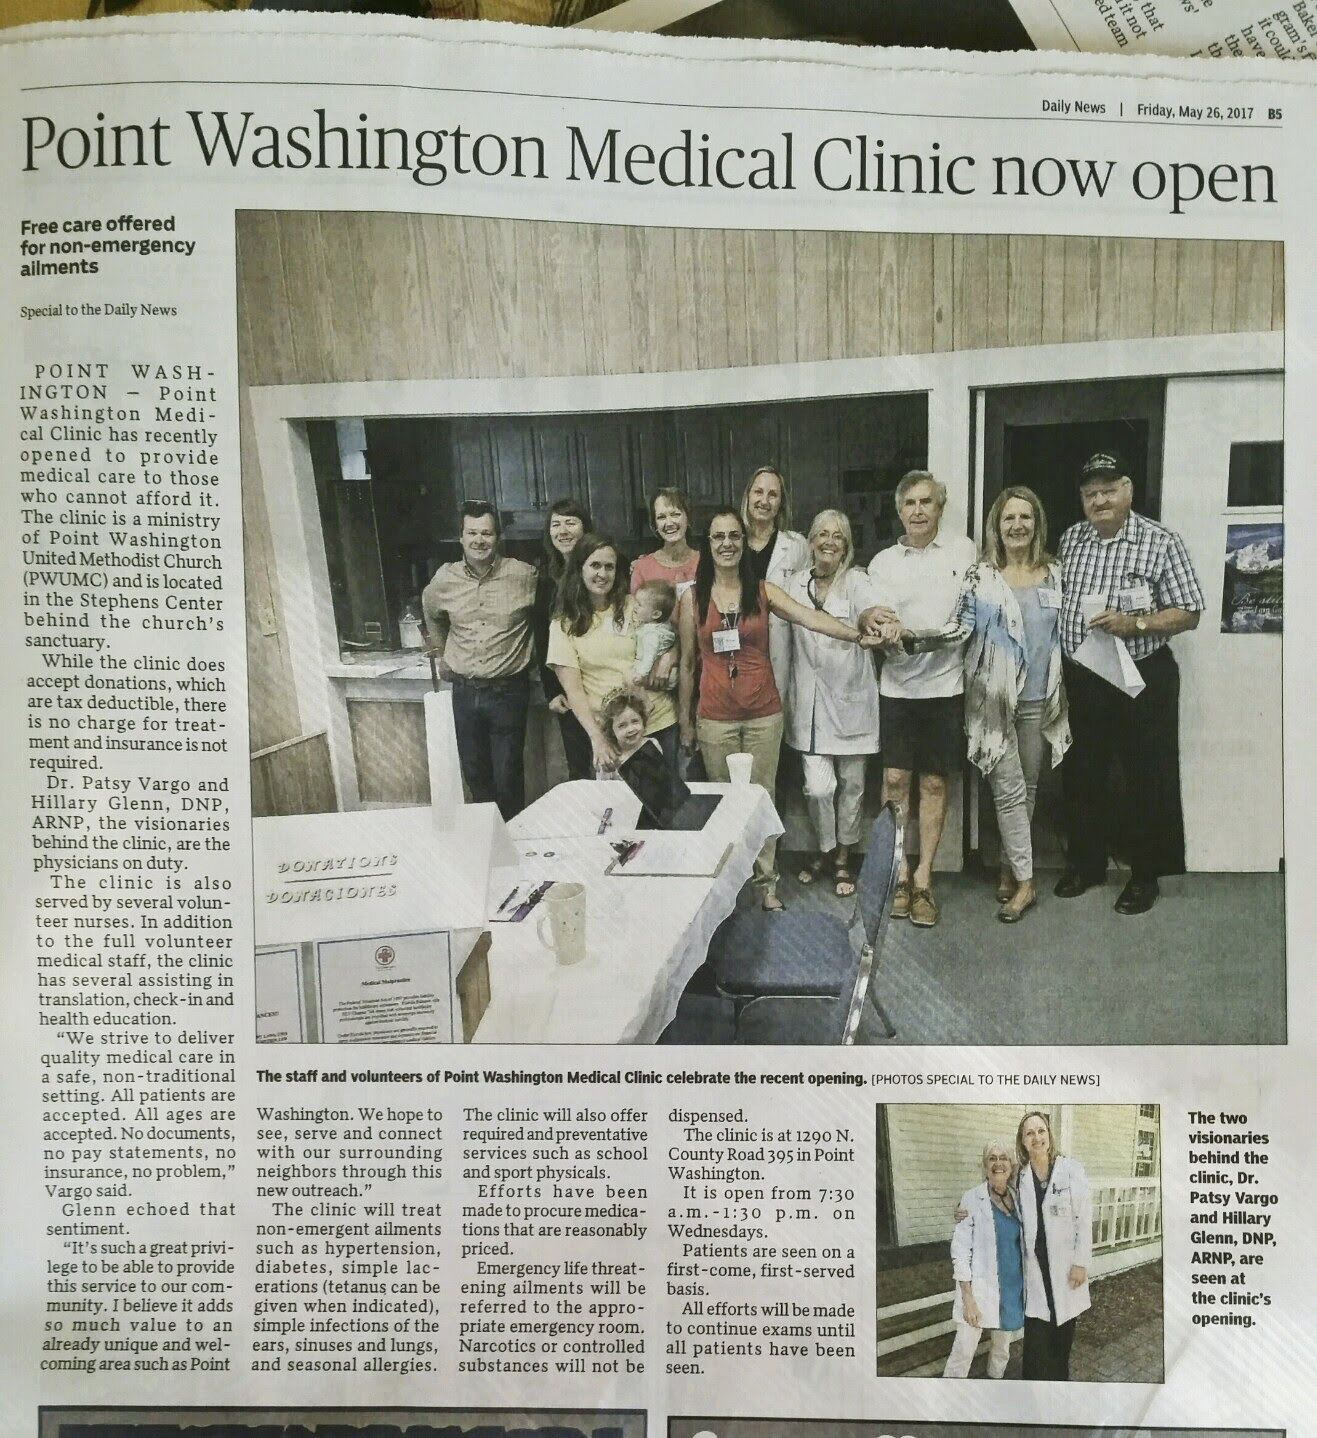  John was a part of the Point Washington Medical Clinic from the very beginning. 